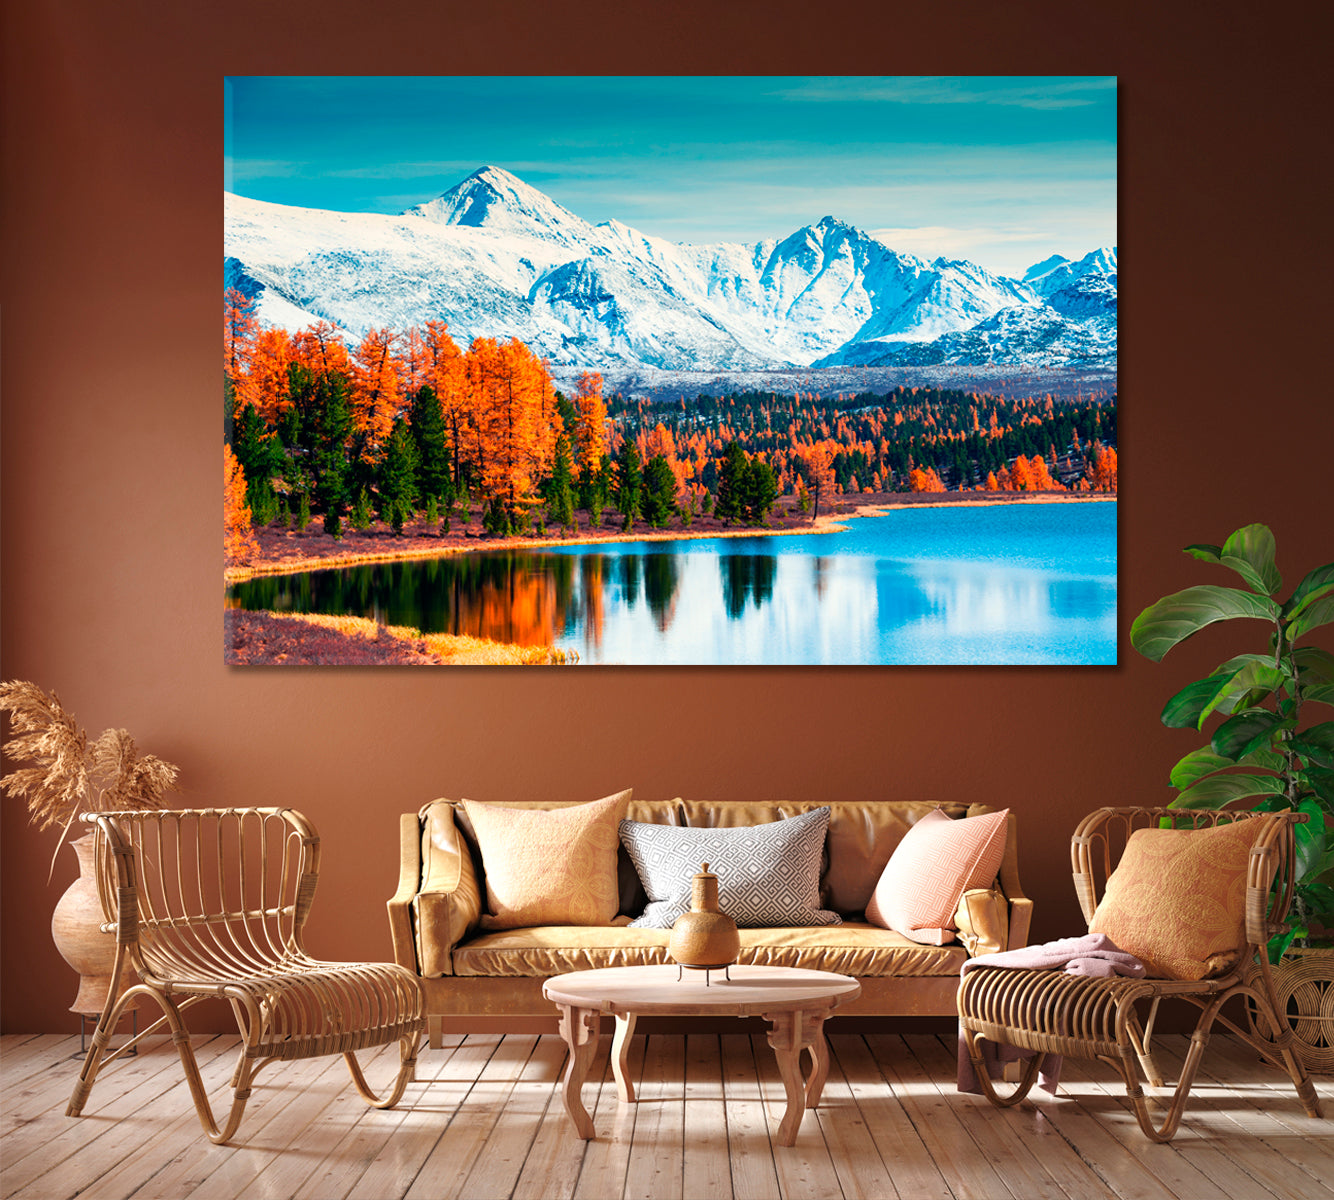 Mountains with Autumn Forest on Kidelu Lake Siberia Russia Canvas Print ArtLexy 1 Panel 24"x16" inches 